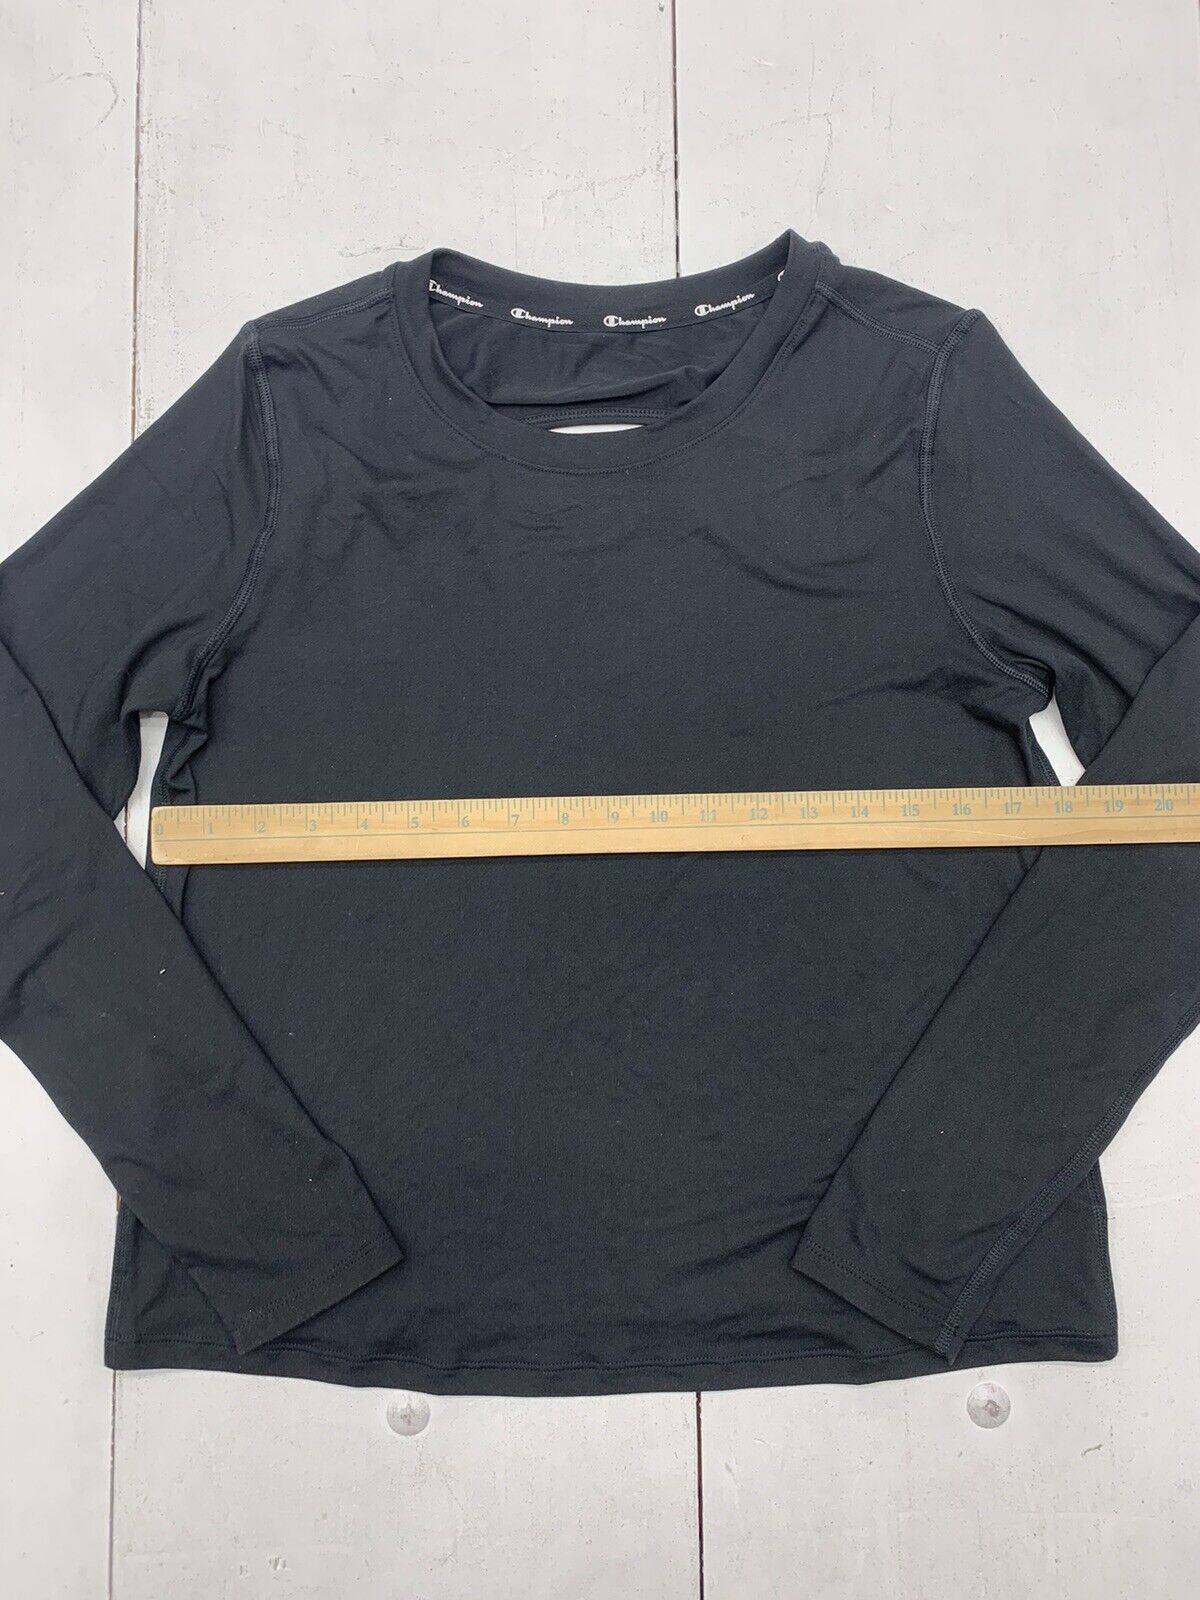 Champion Womens Black Long Sleeve Athletic Shirt Size Small - beyond  exchange